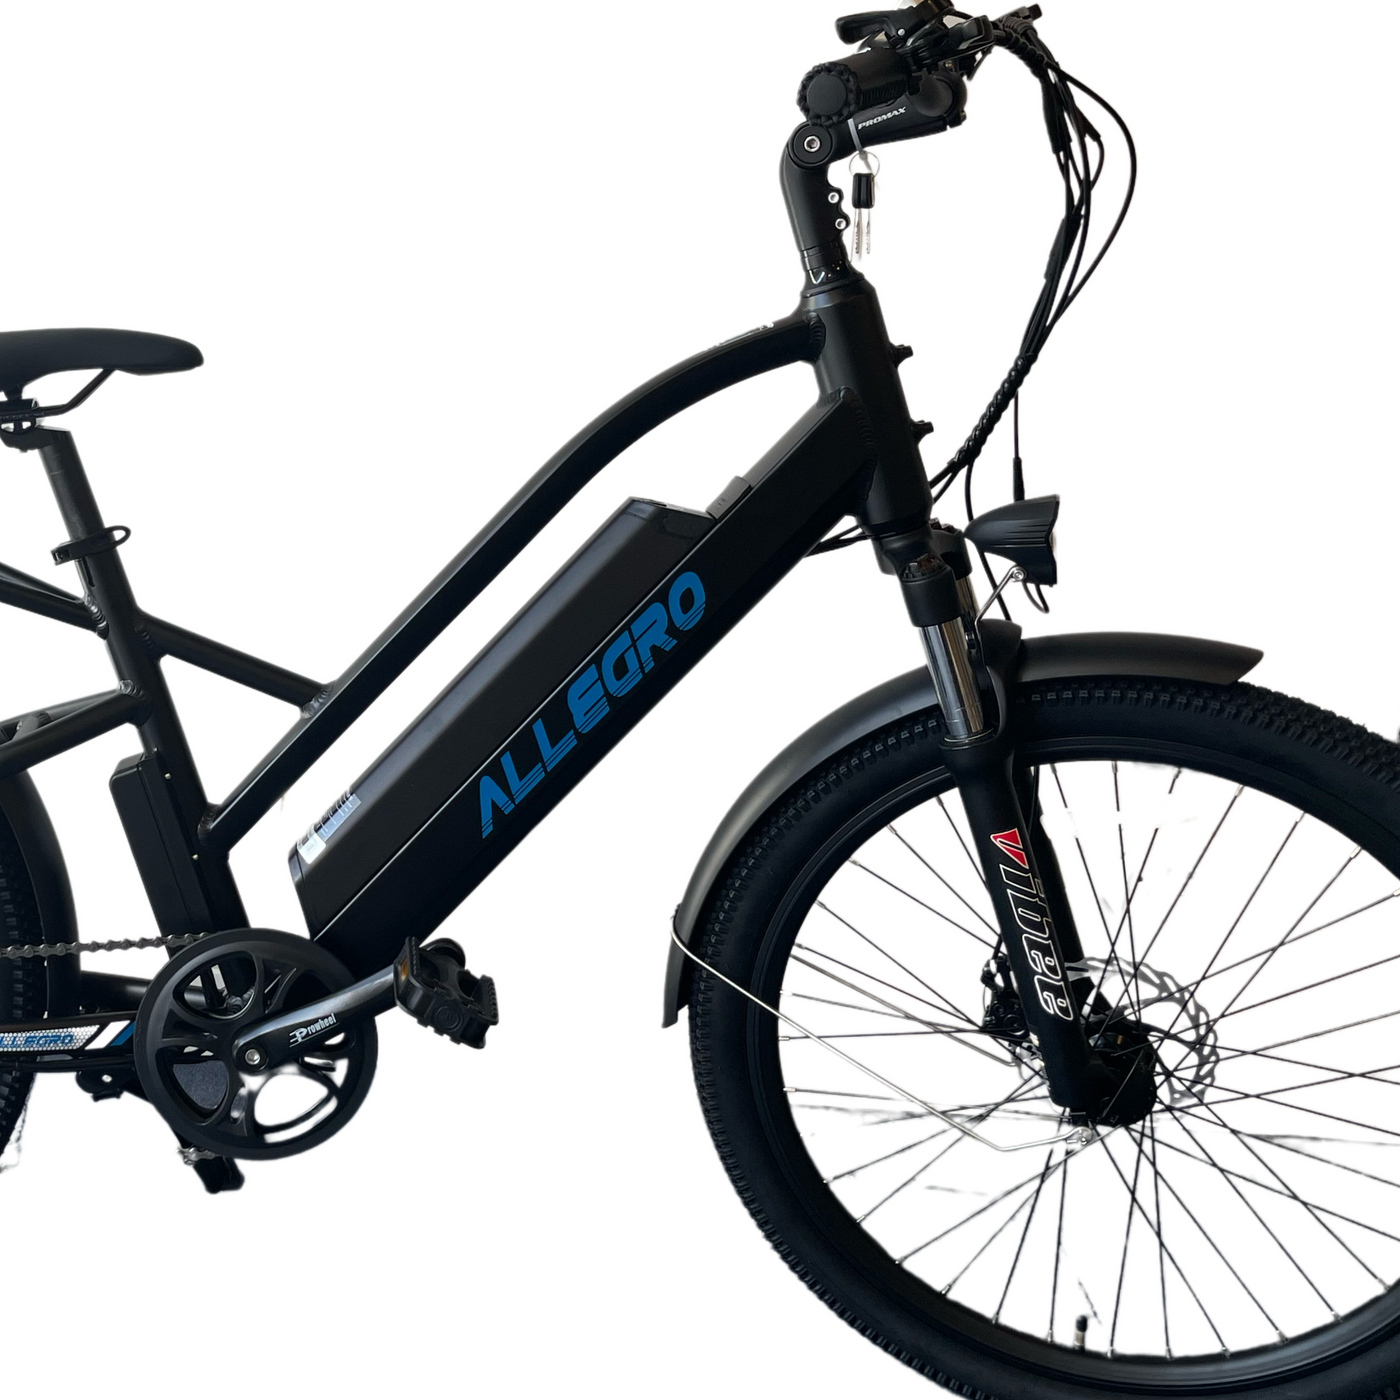 Allegro 6156 delivery Electric 48V 19.2AH – B.Smart Electric bike 500W